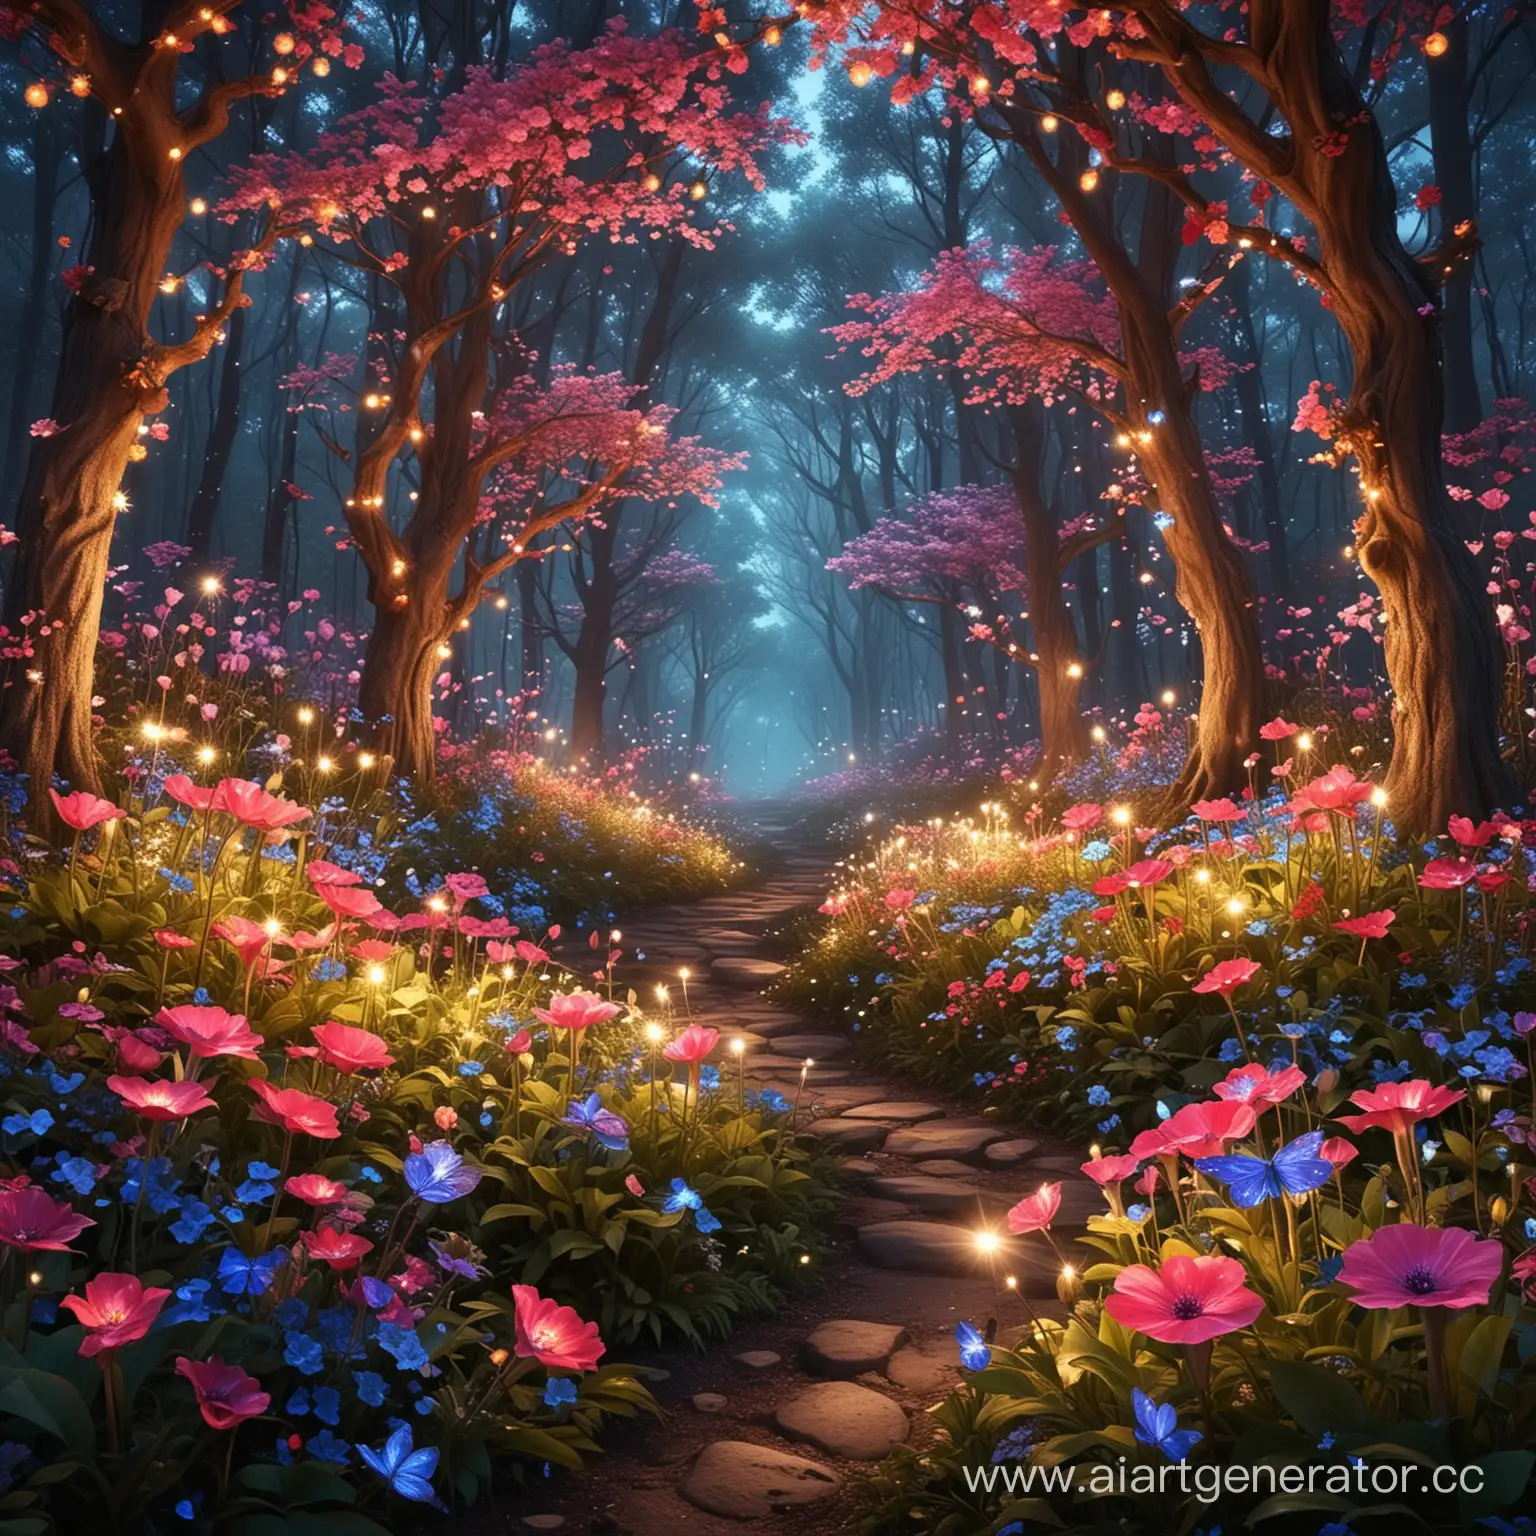 fantastic flowers bloom and glow, lights twinkle, a magical forest